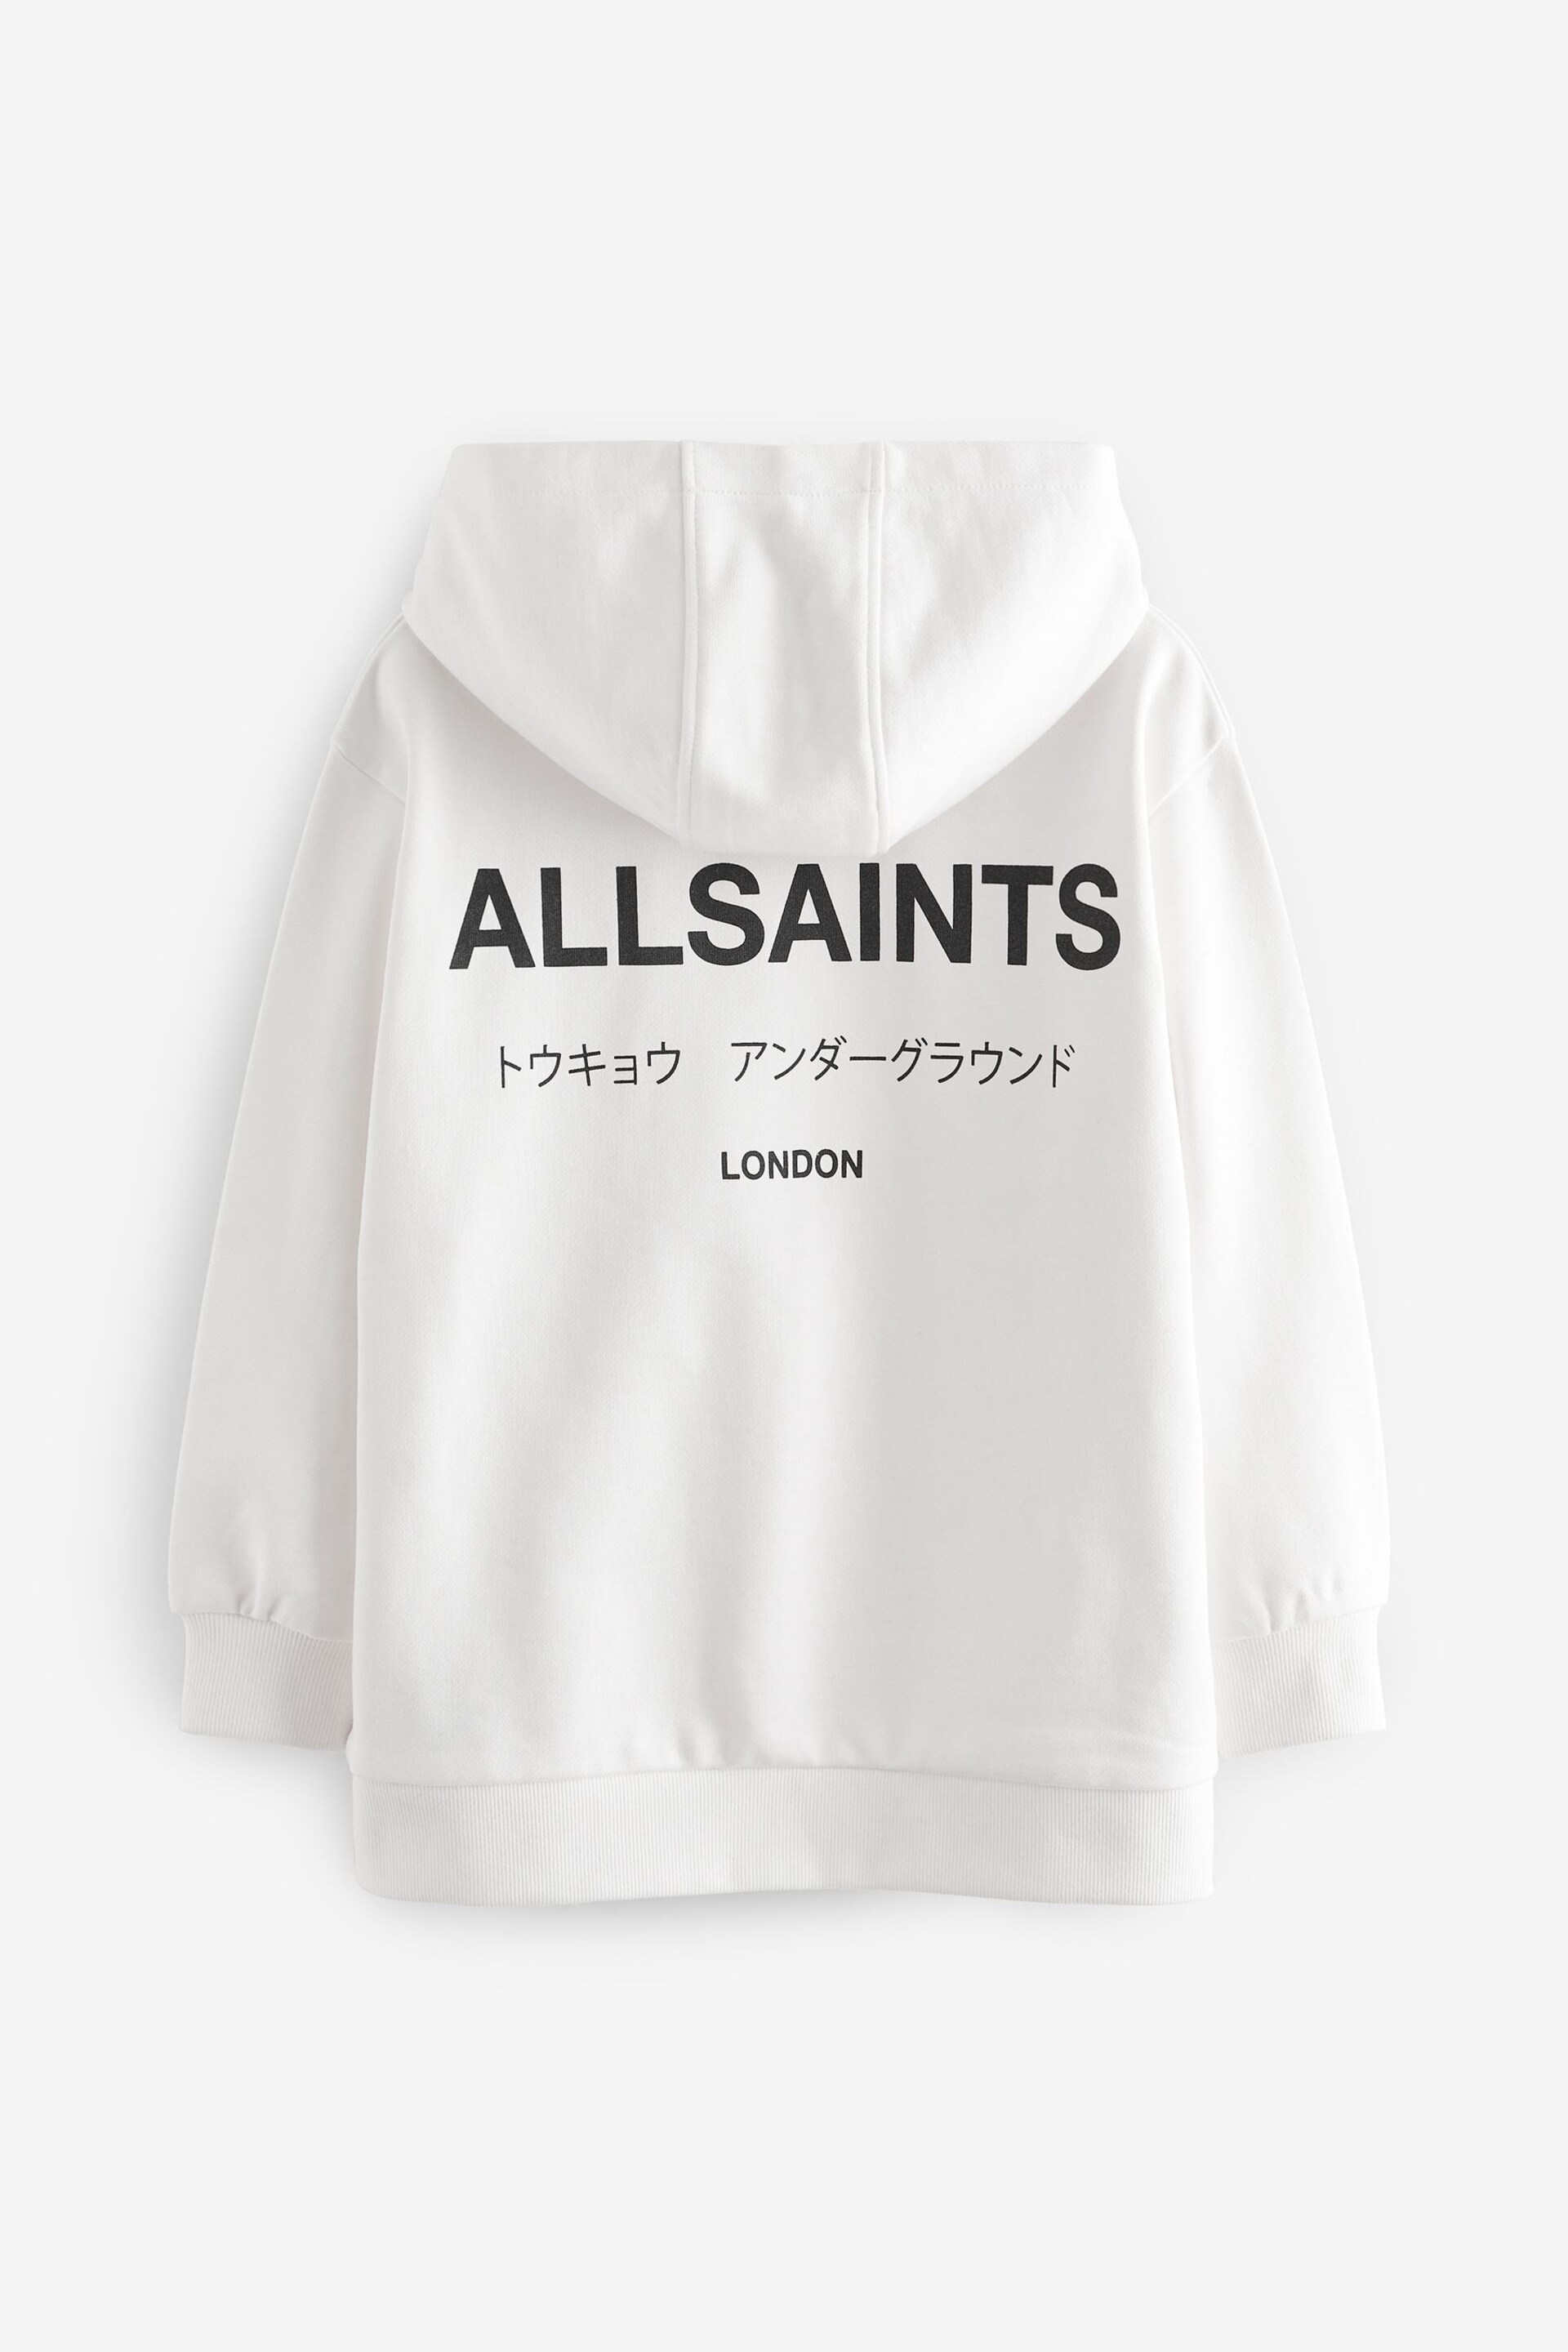 smALLSAINTS White Underground Oversized Pullover Hoodie - Image 5 of 6